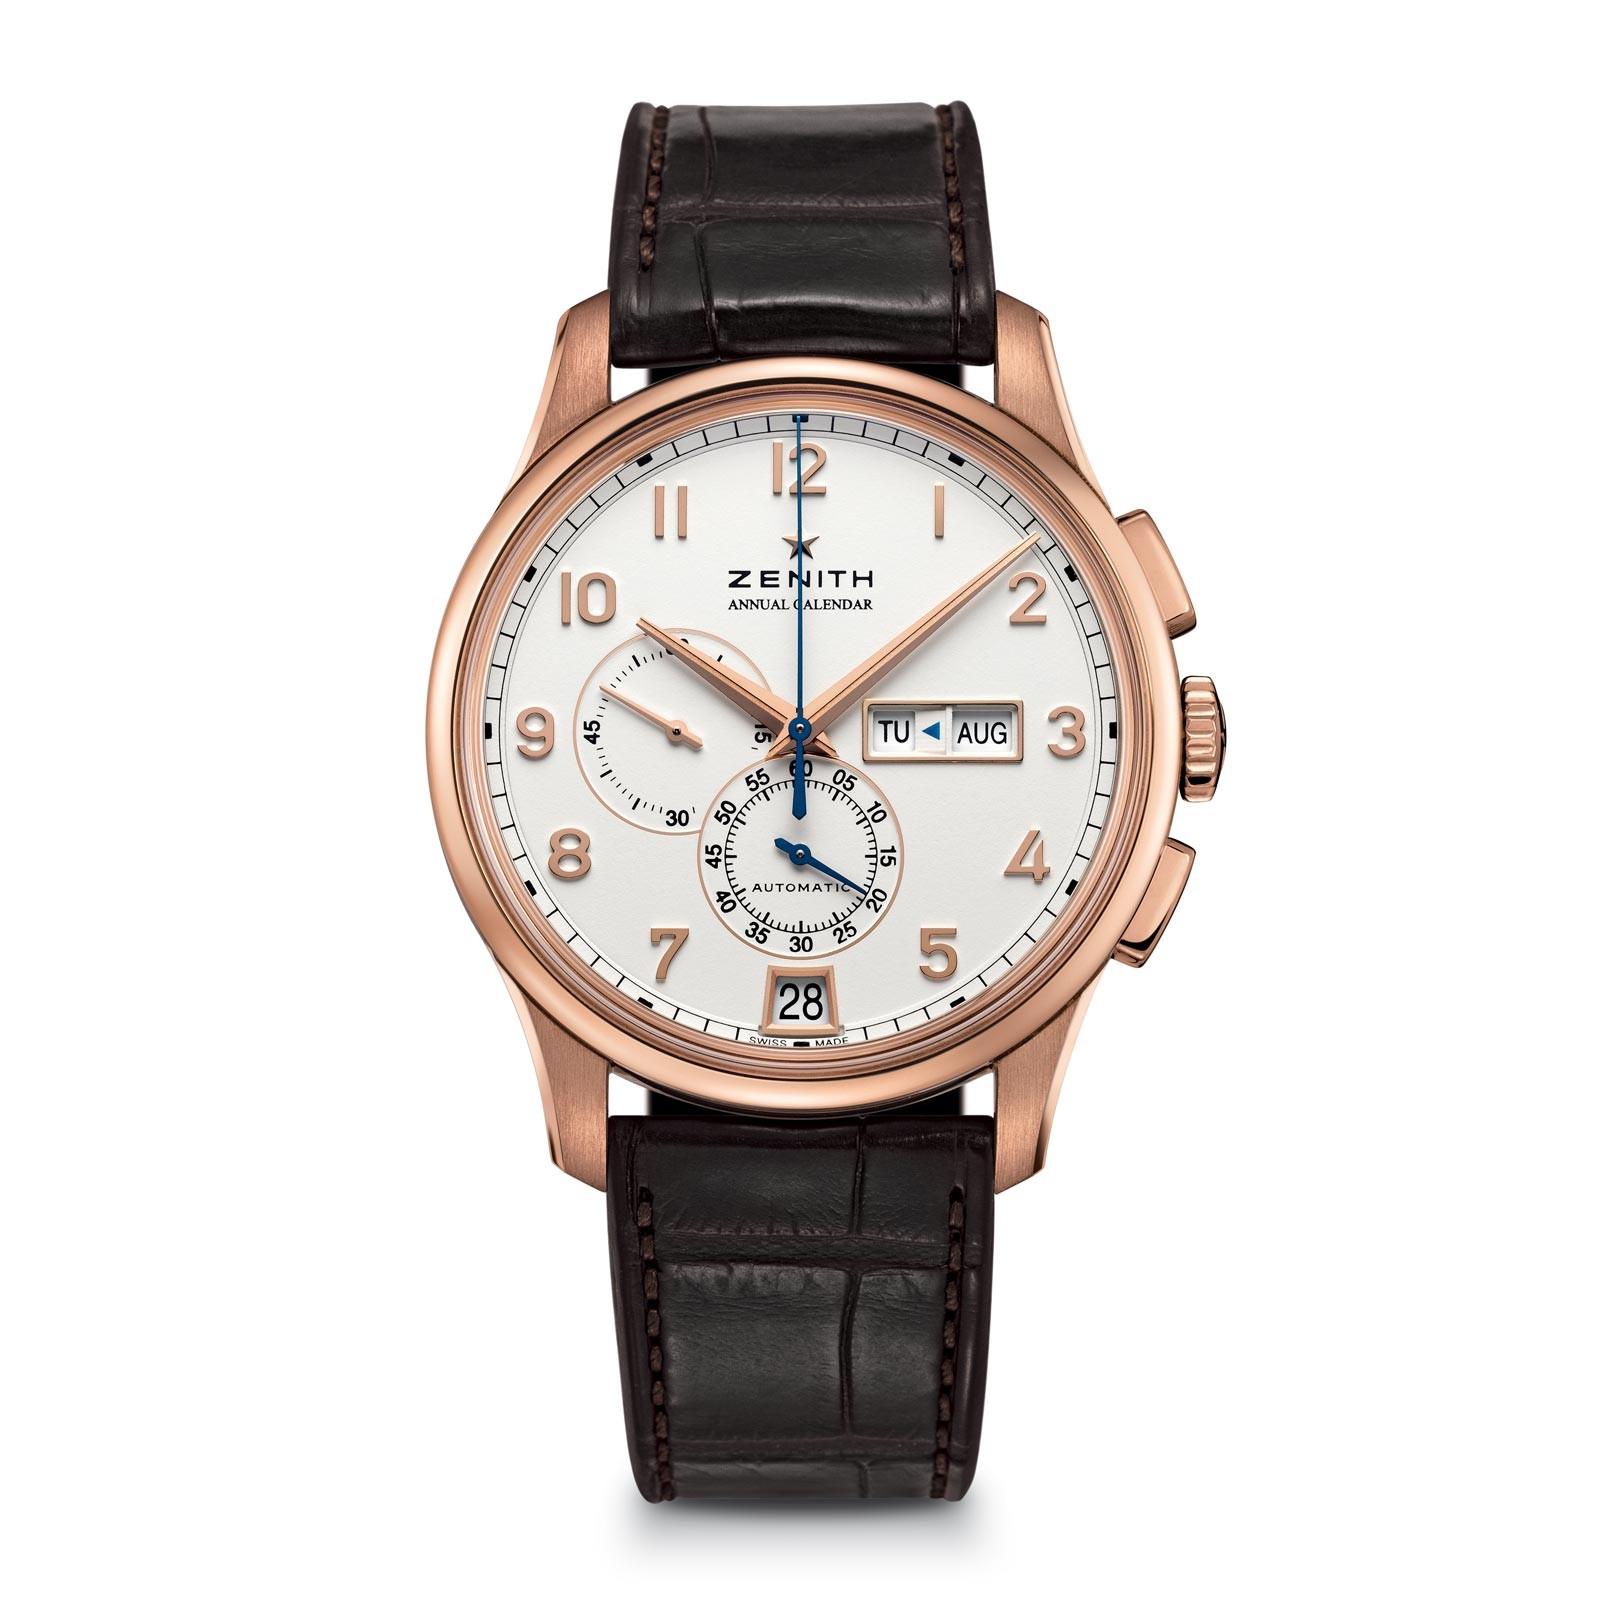 Captain Chronograph Automatic in Rose Gold On Brown Crocodile Leather Strap with White Arabic Dial